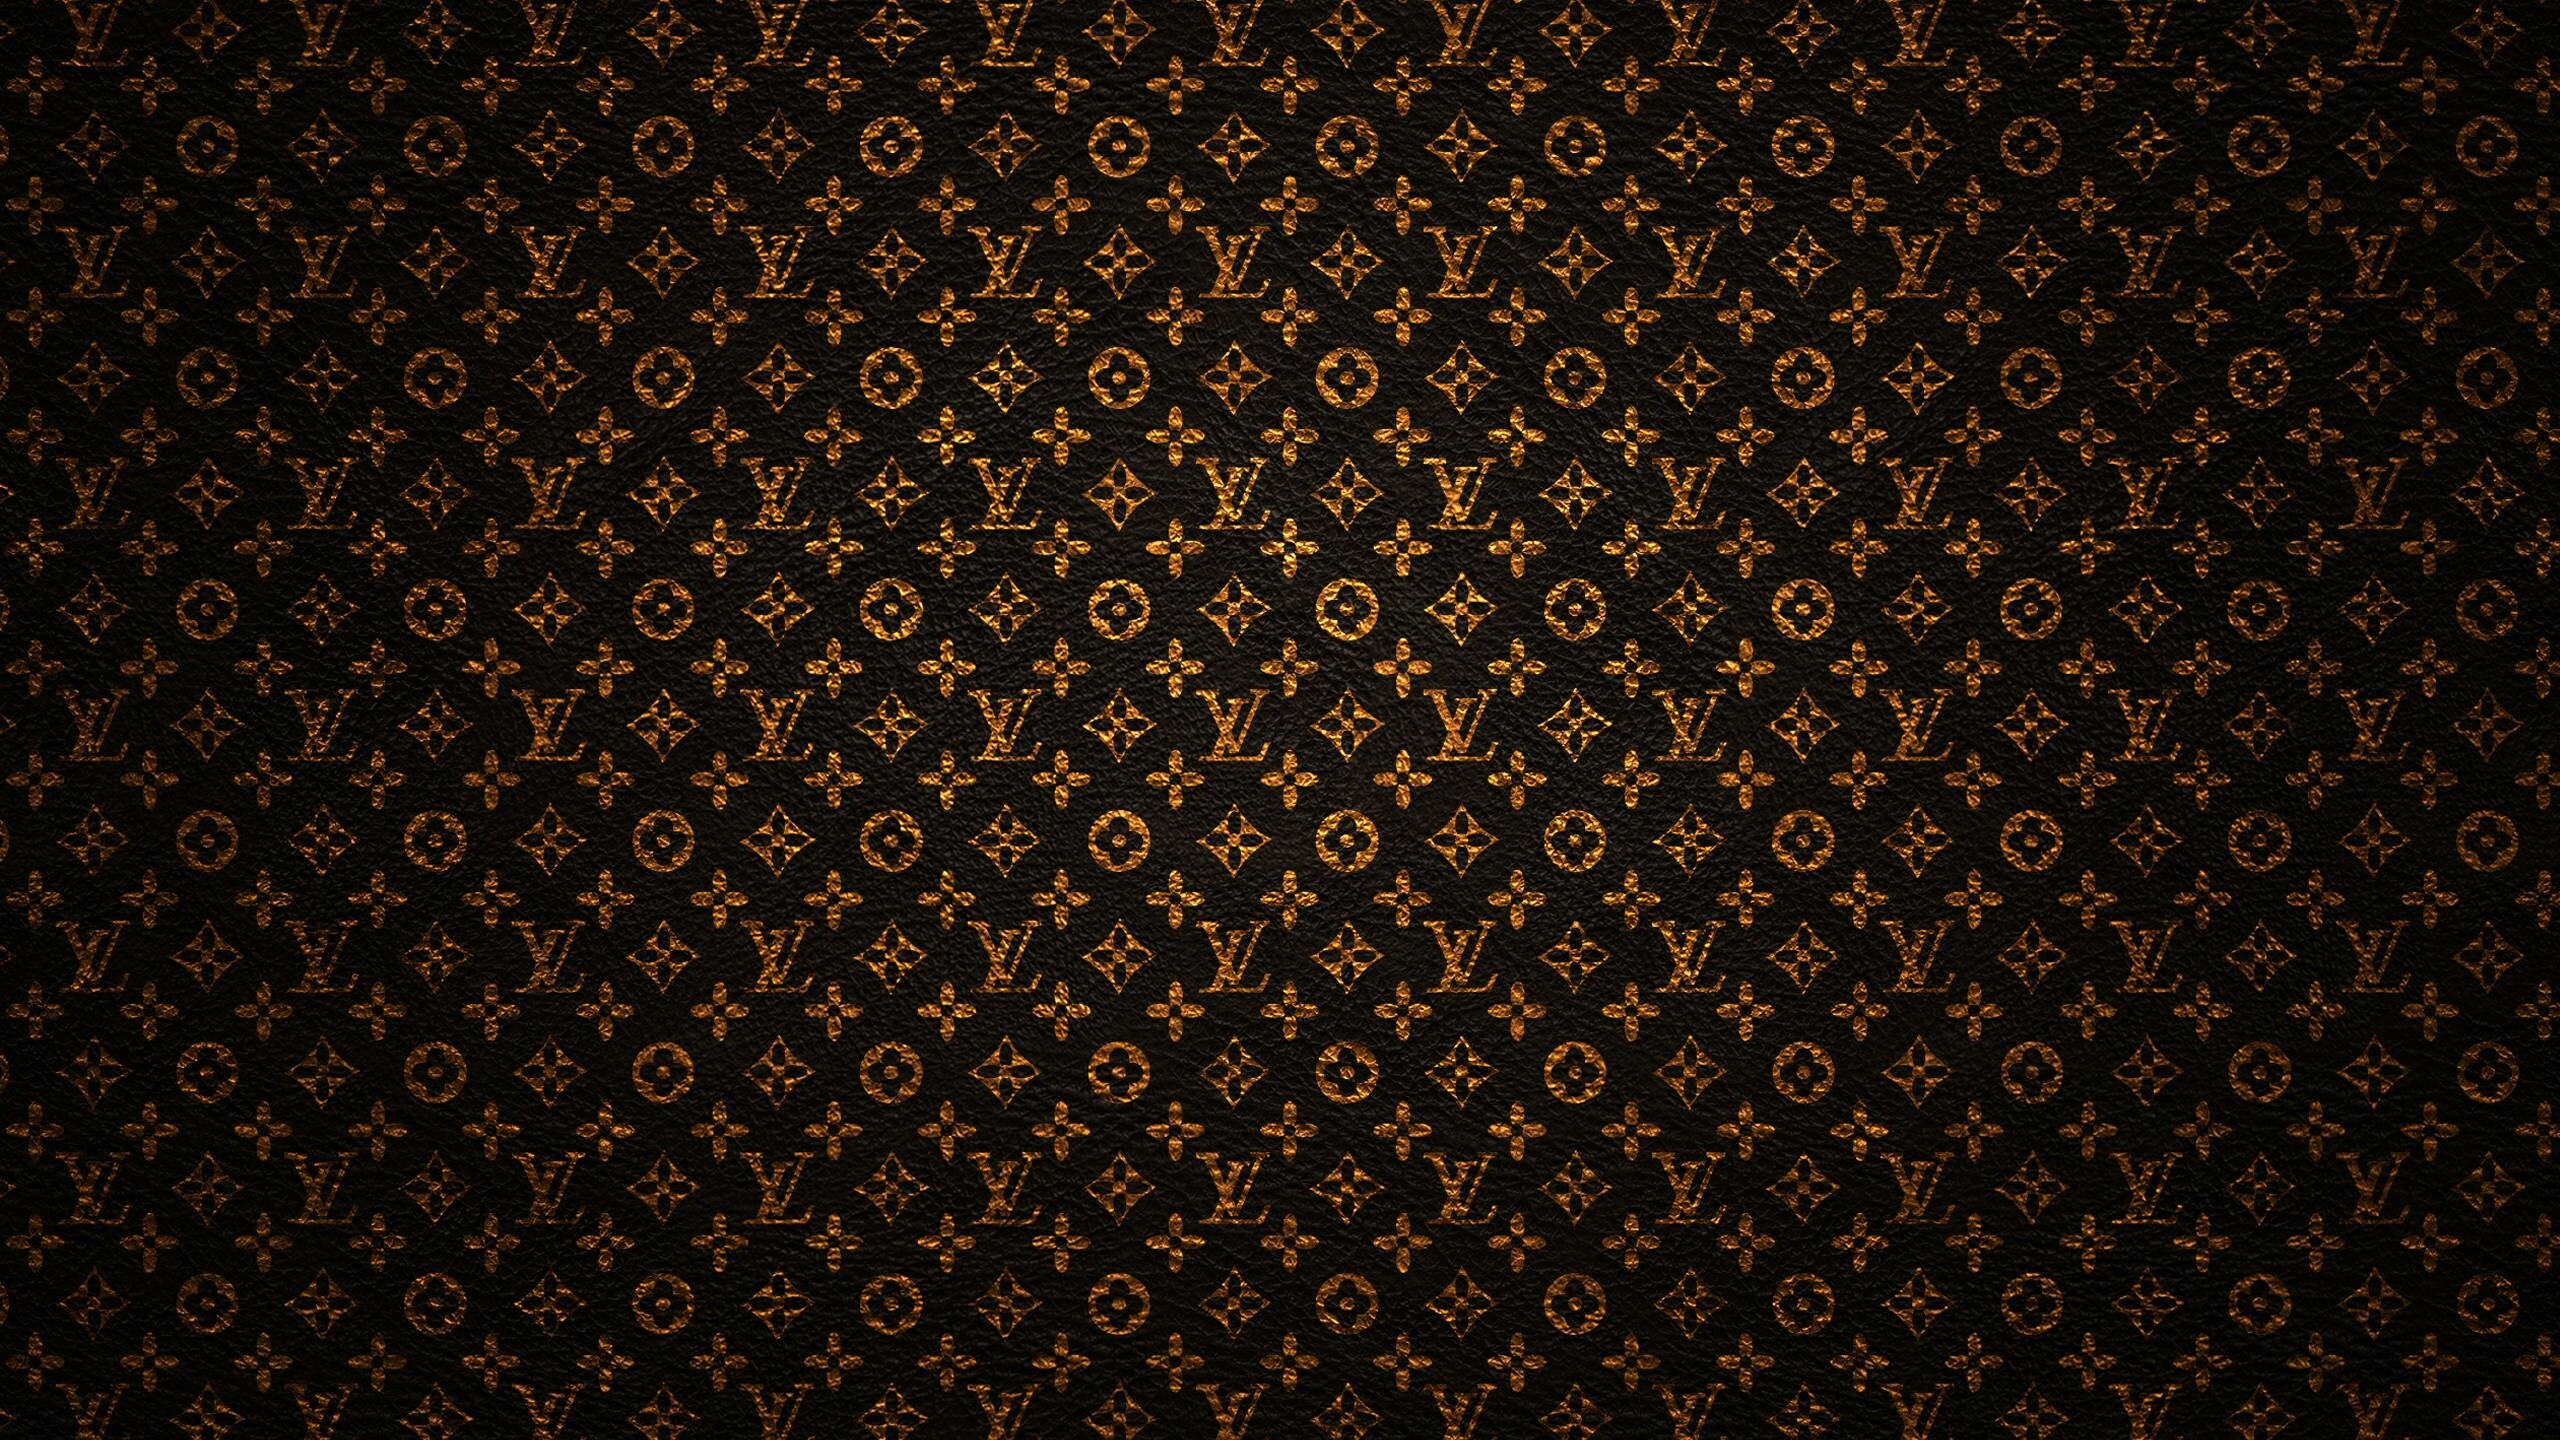 Louis Vuitton: Recognized for its timeless design and elegant aesthetic. 2560x1440 HD Wallpaper.